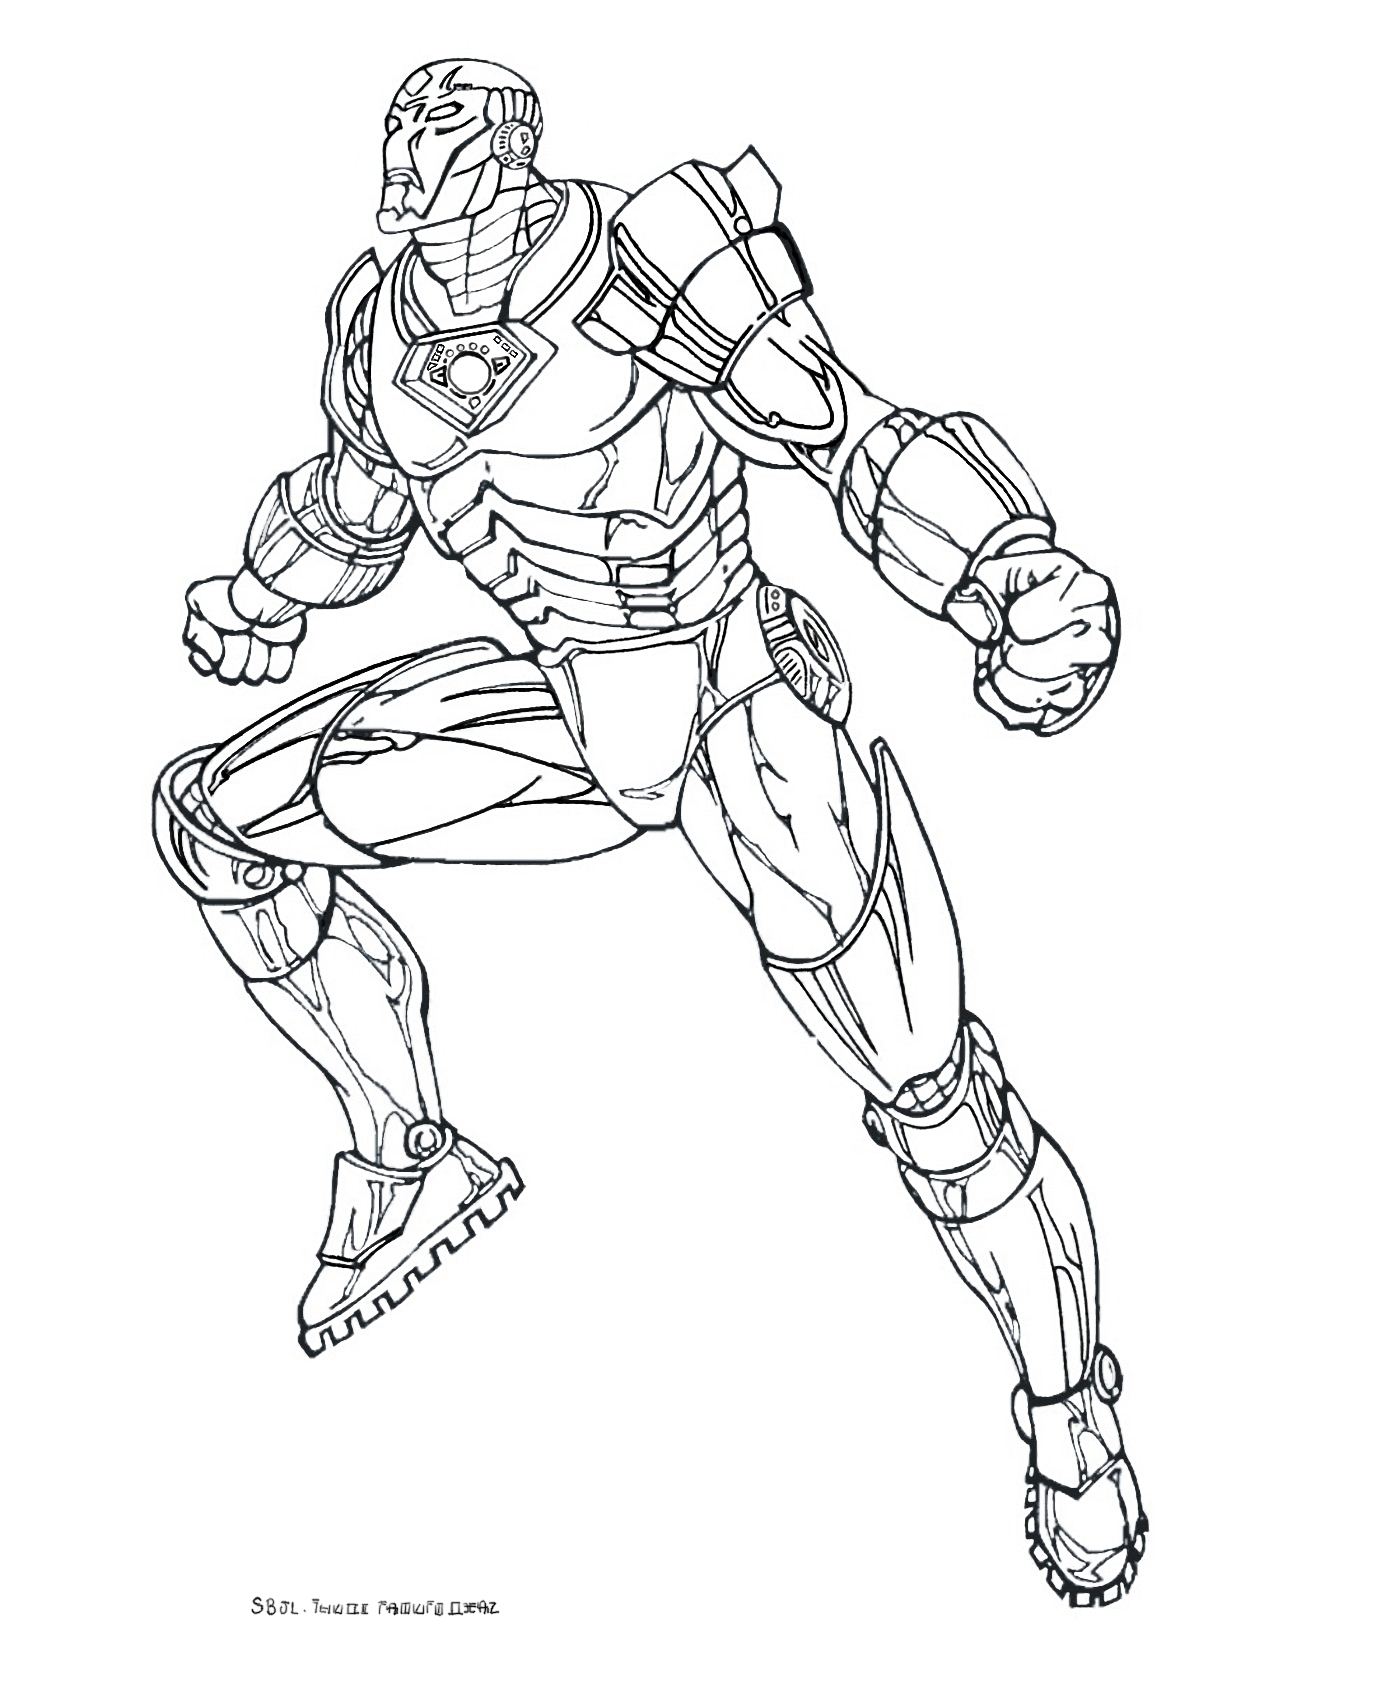 Iron Man Colouring Pages For Kids - 291+ Popular SVG File